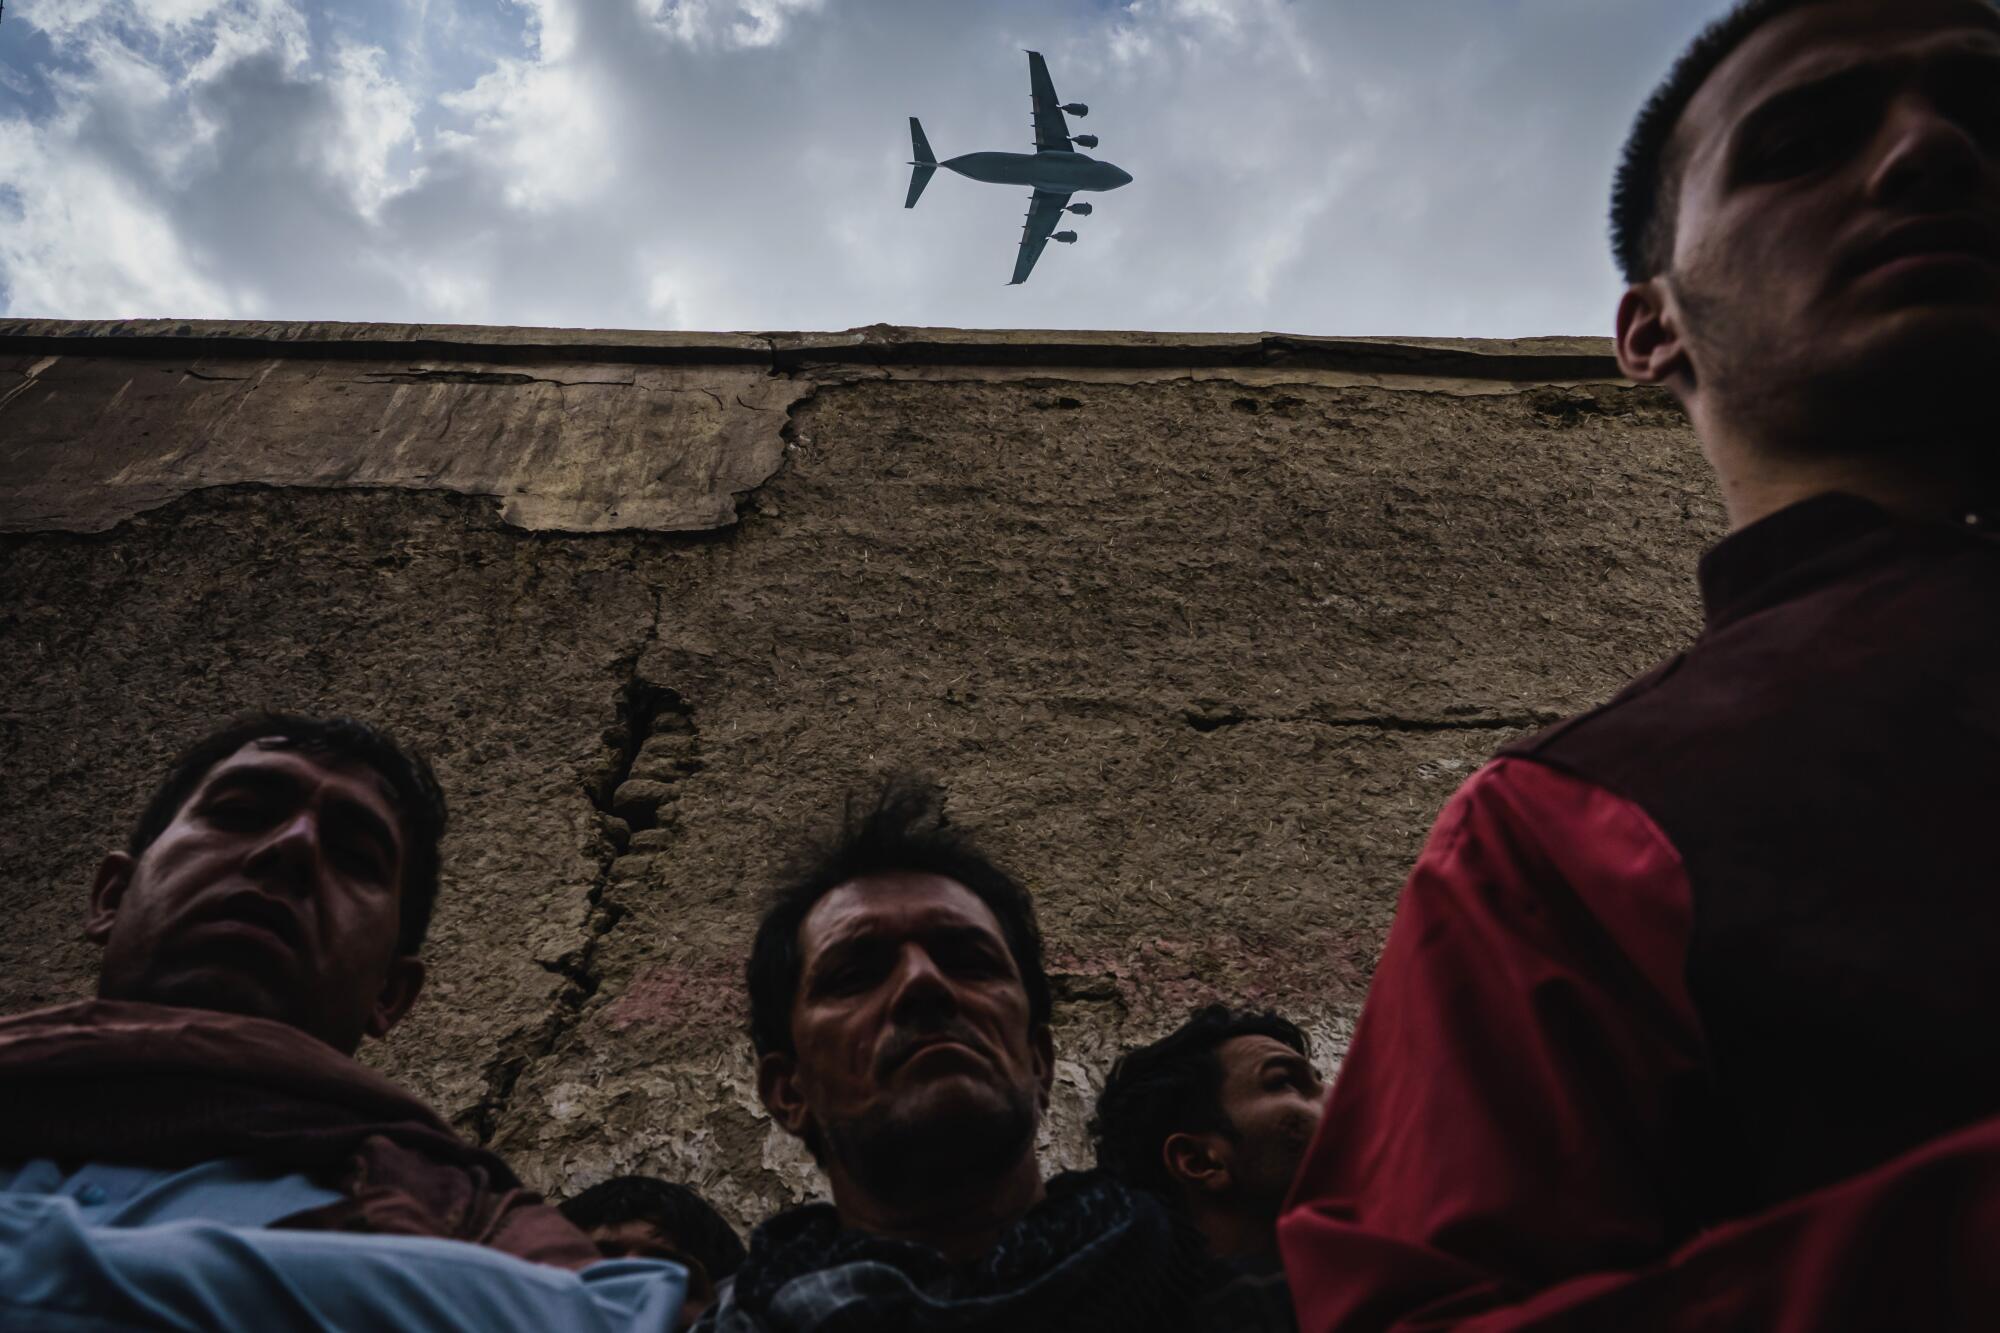 A military transport plane flies over an Afghan family